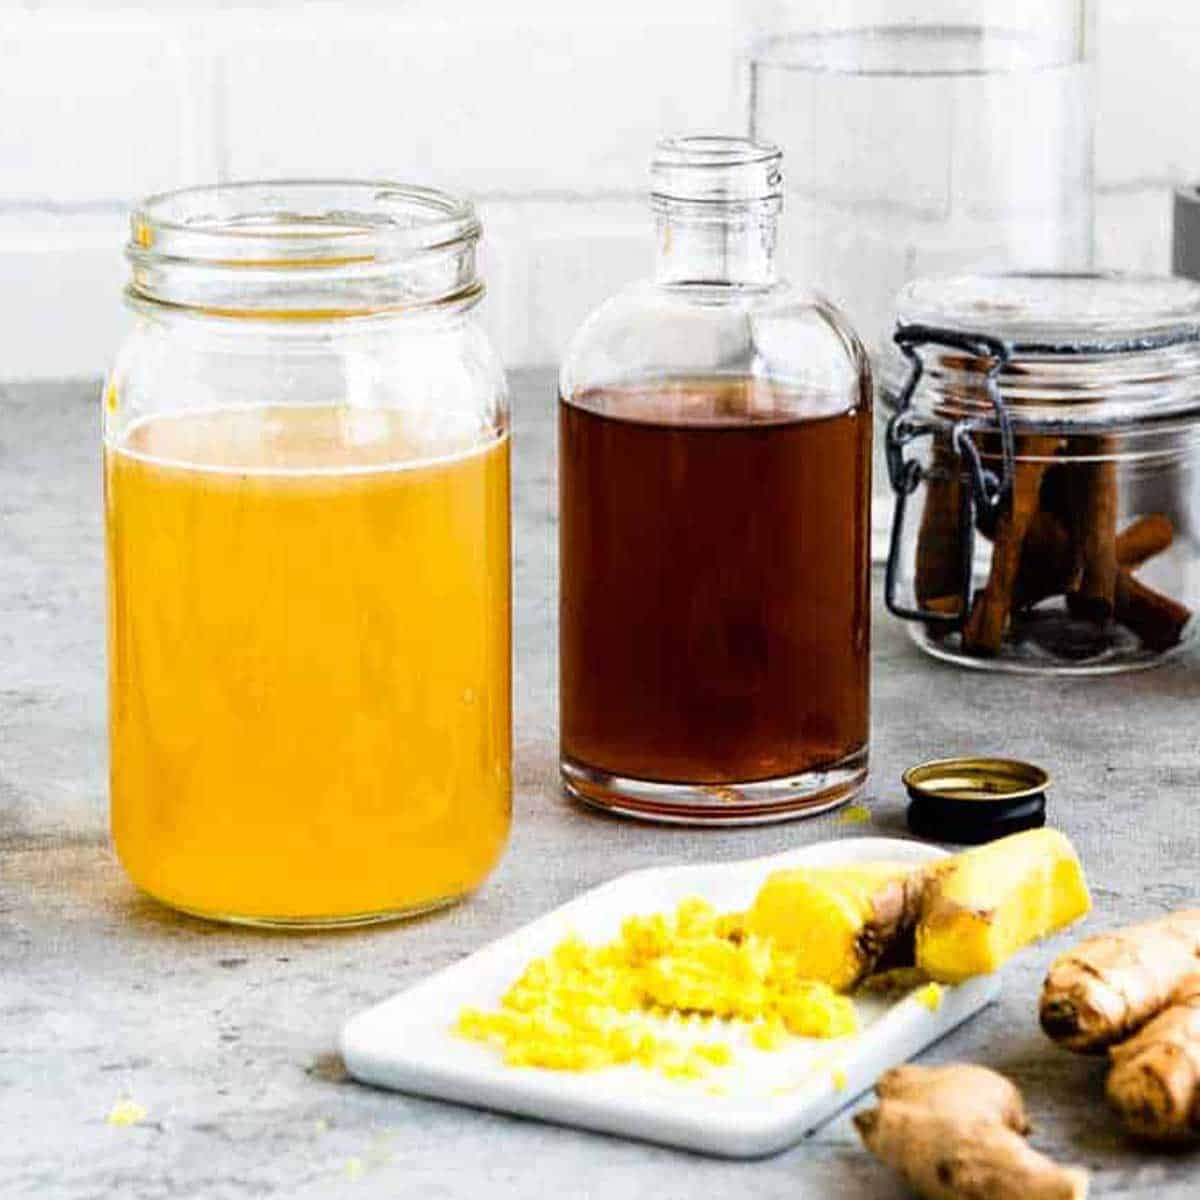 yellow metabolism tea in clear glass jar next to a glass jar of apple cider vinegar on a counter with fresh sliced ginger and turmeric.